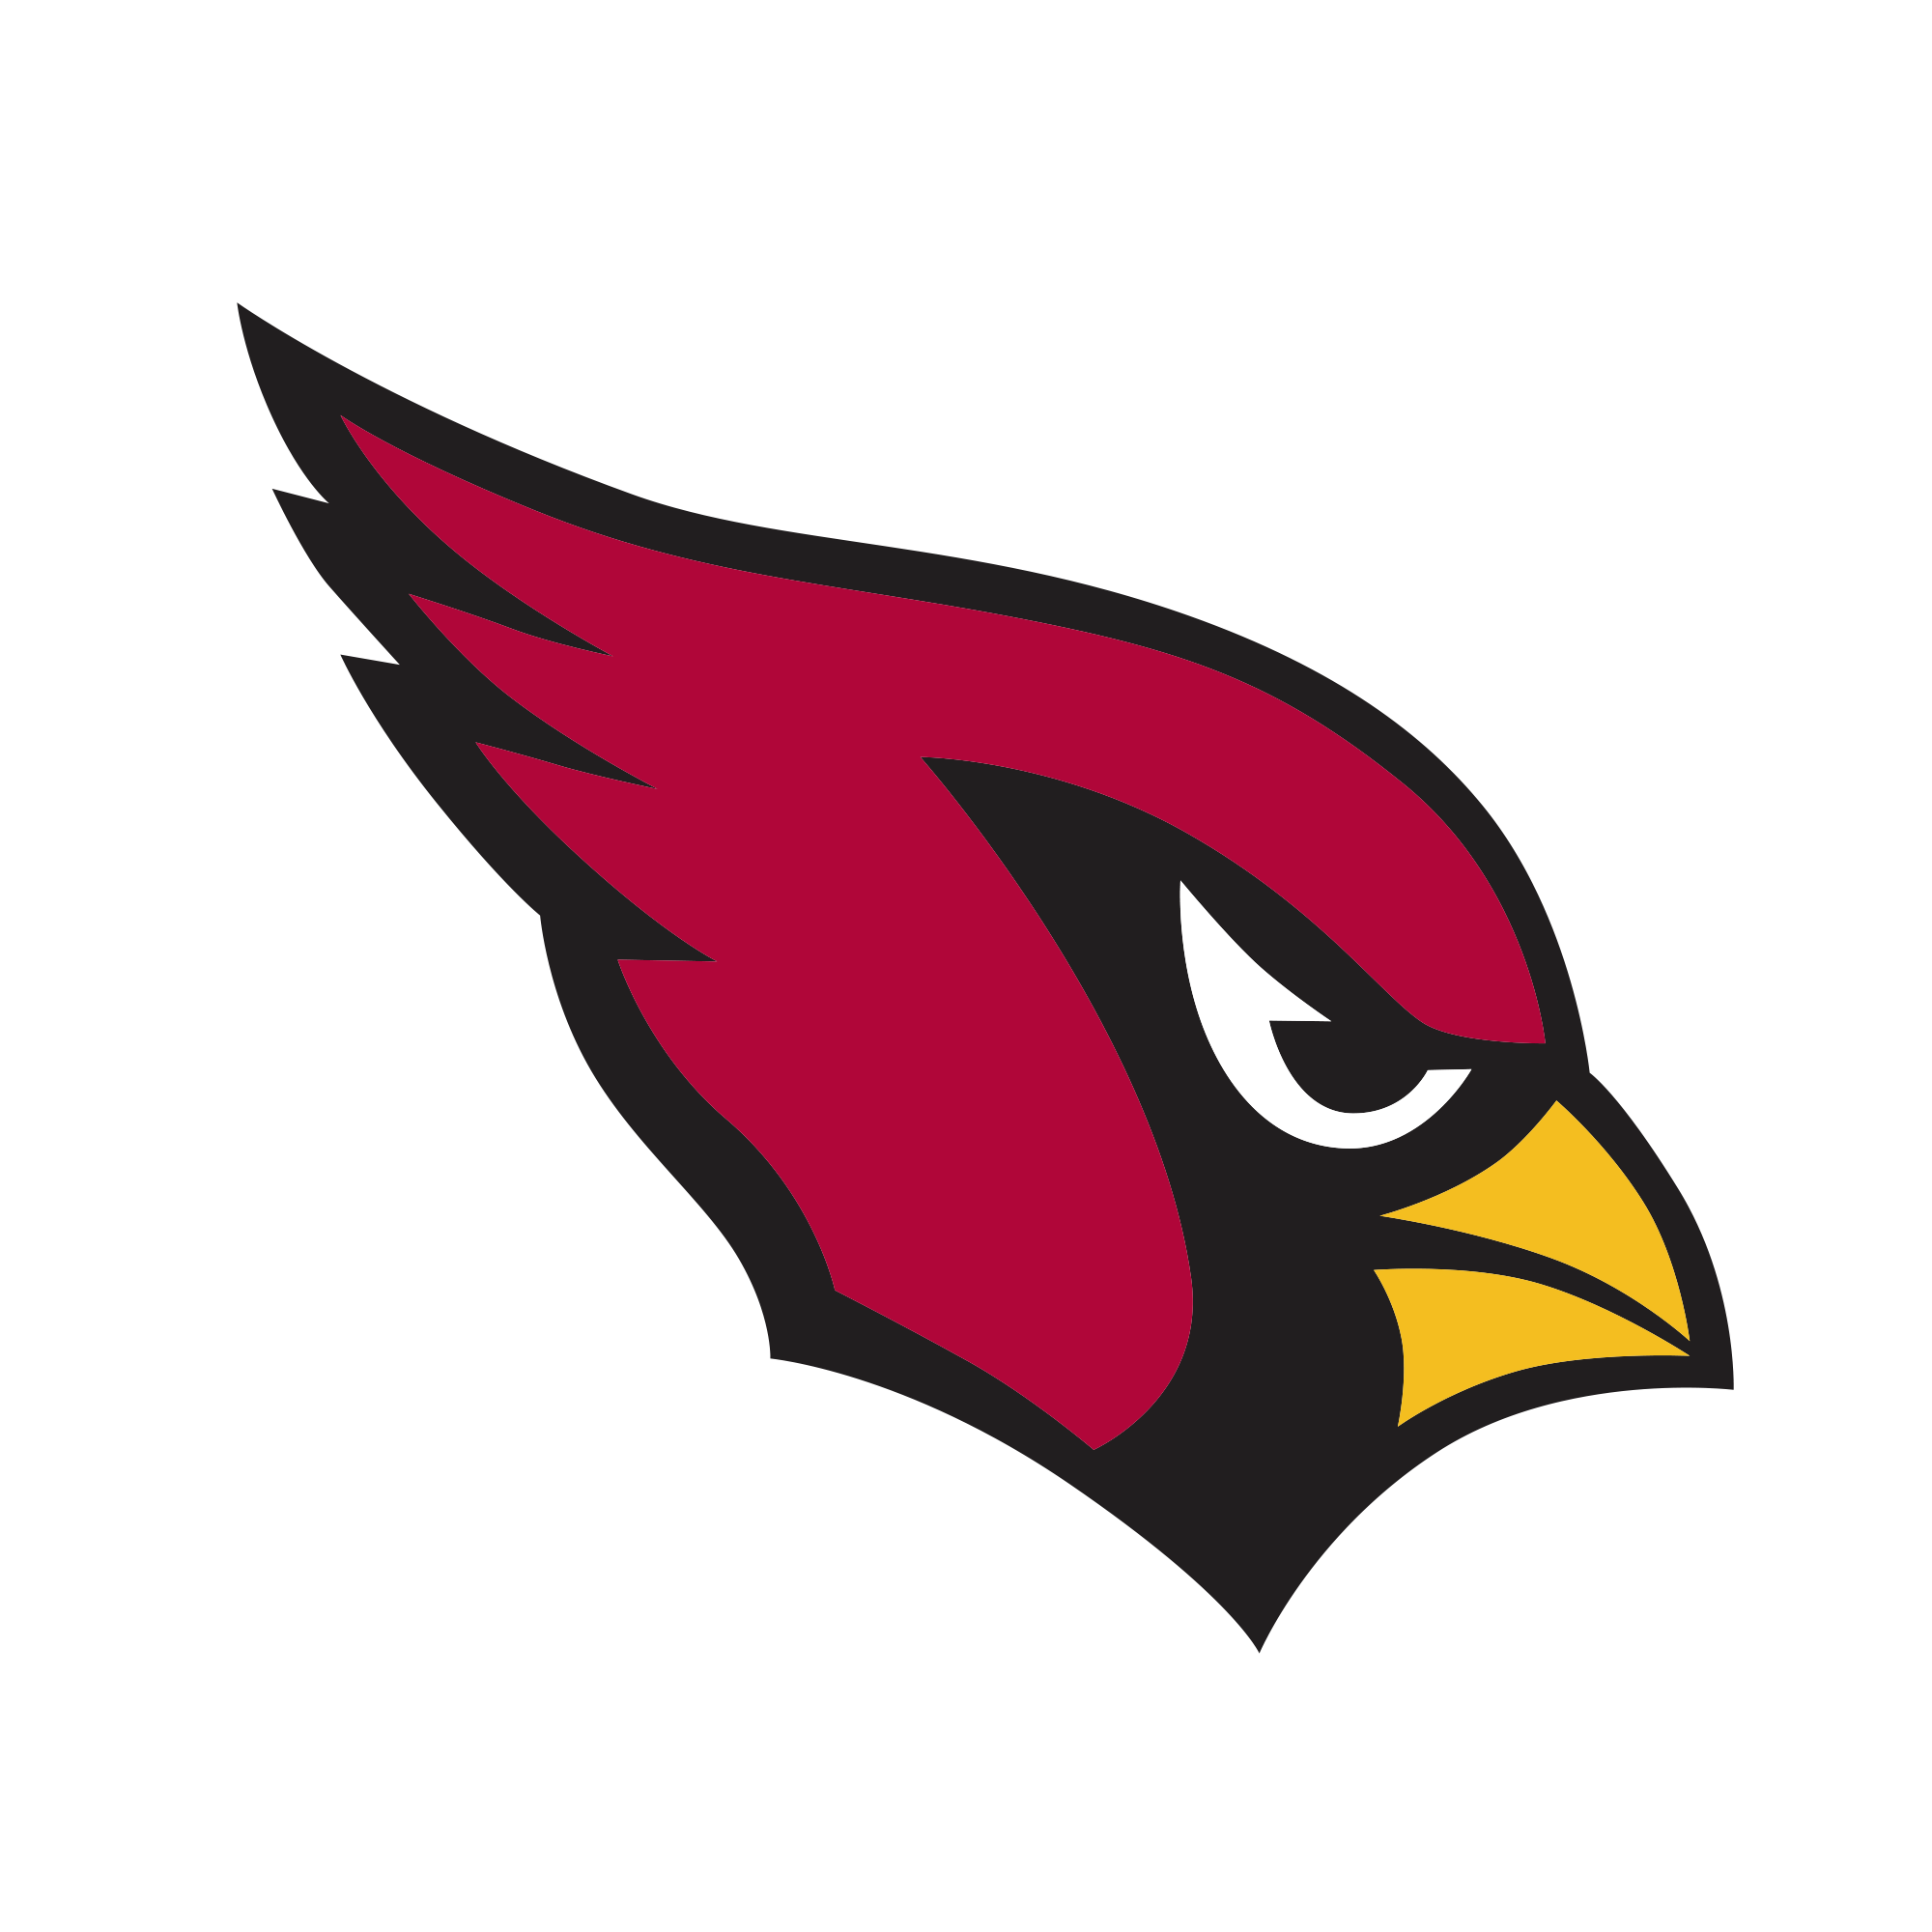 Arizona Cardinals Owner Bidwill Accused of Workplace Misconduct